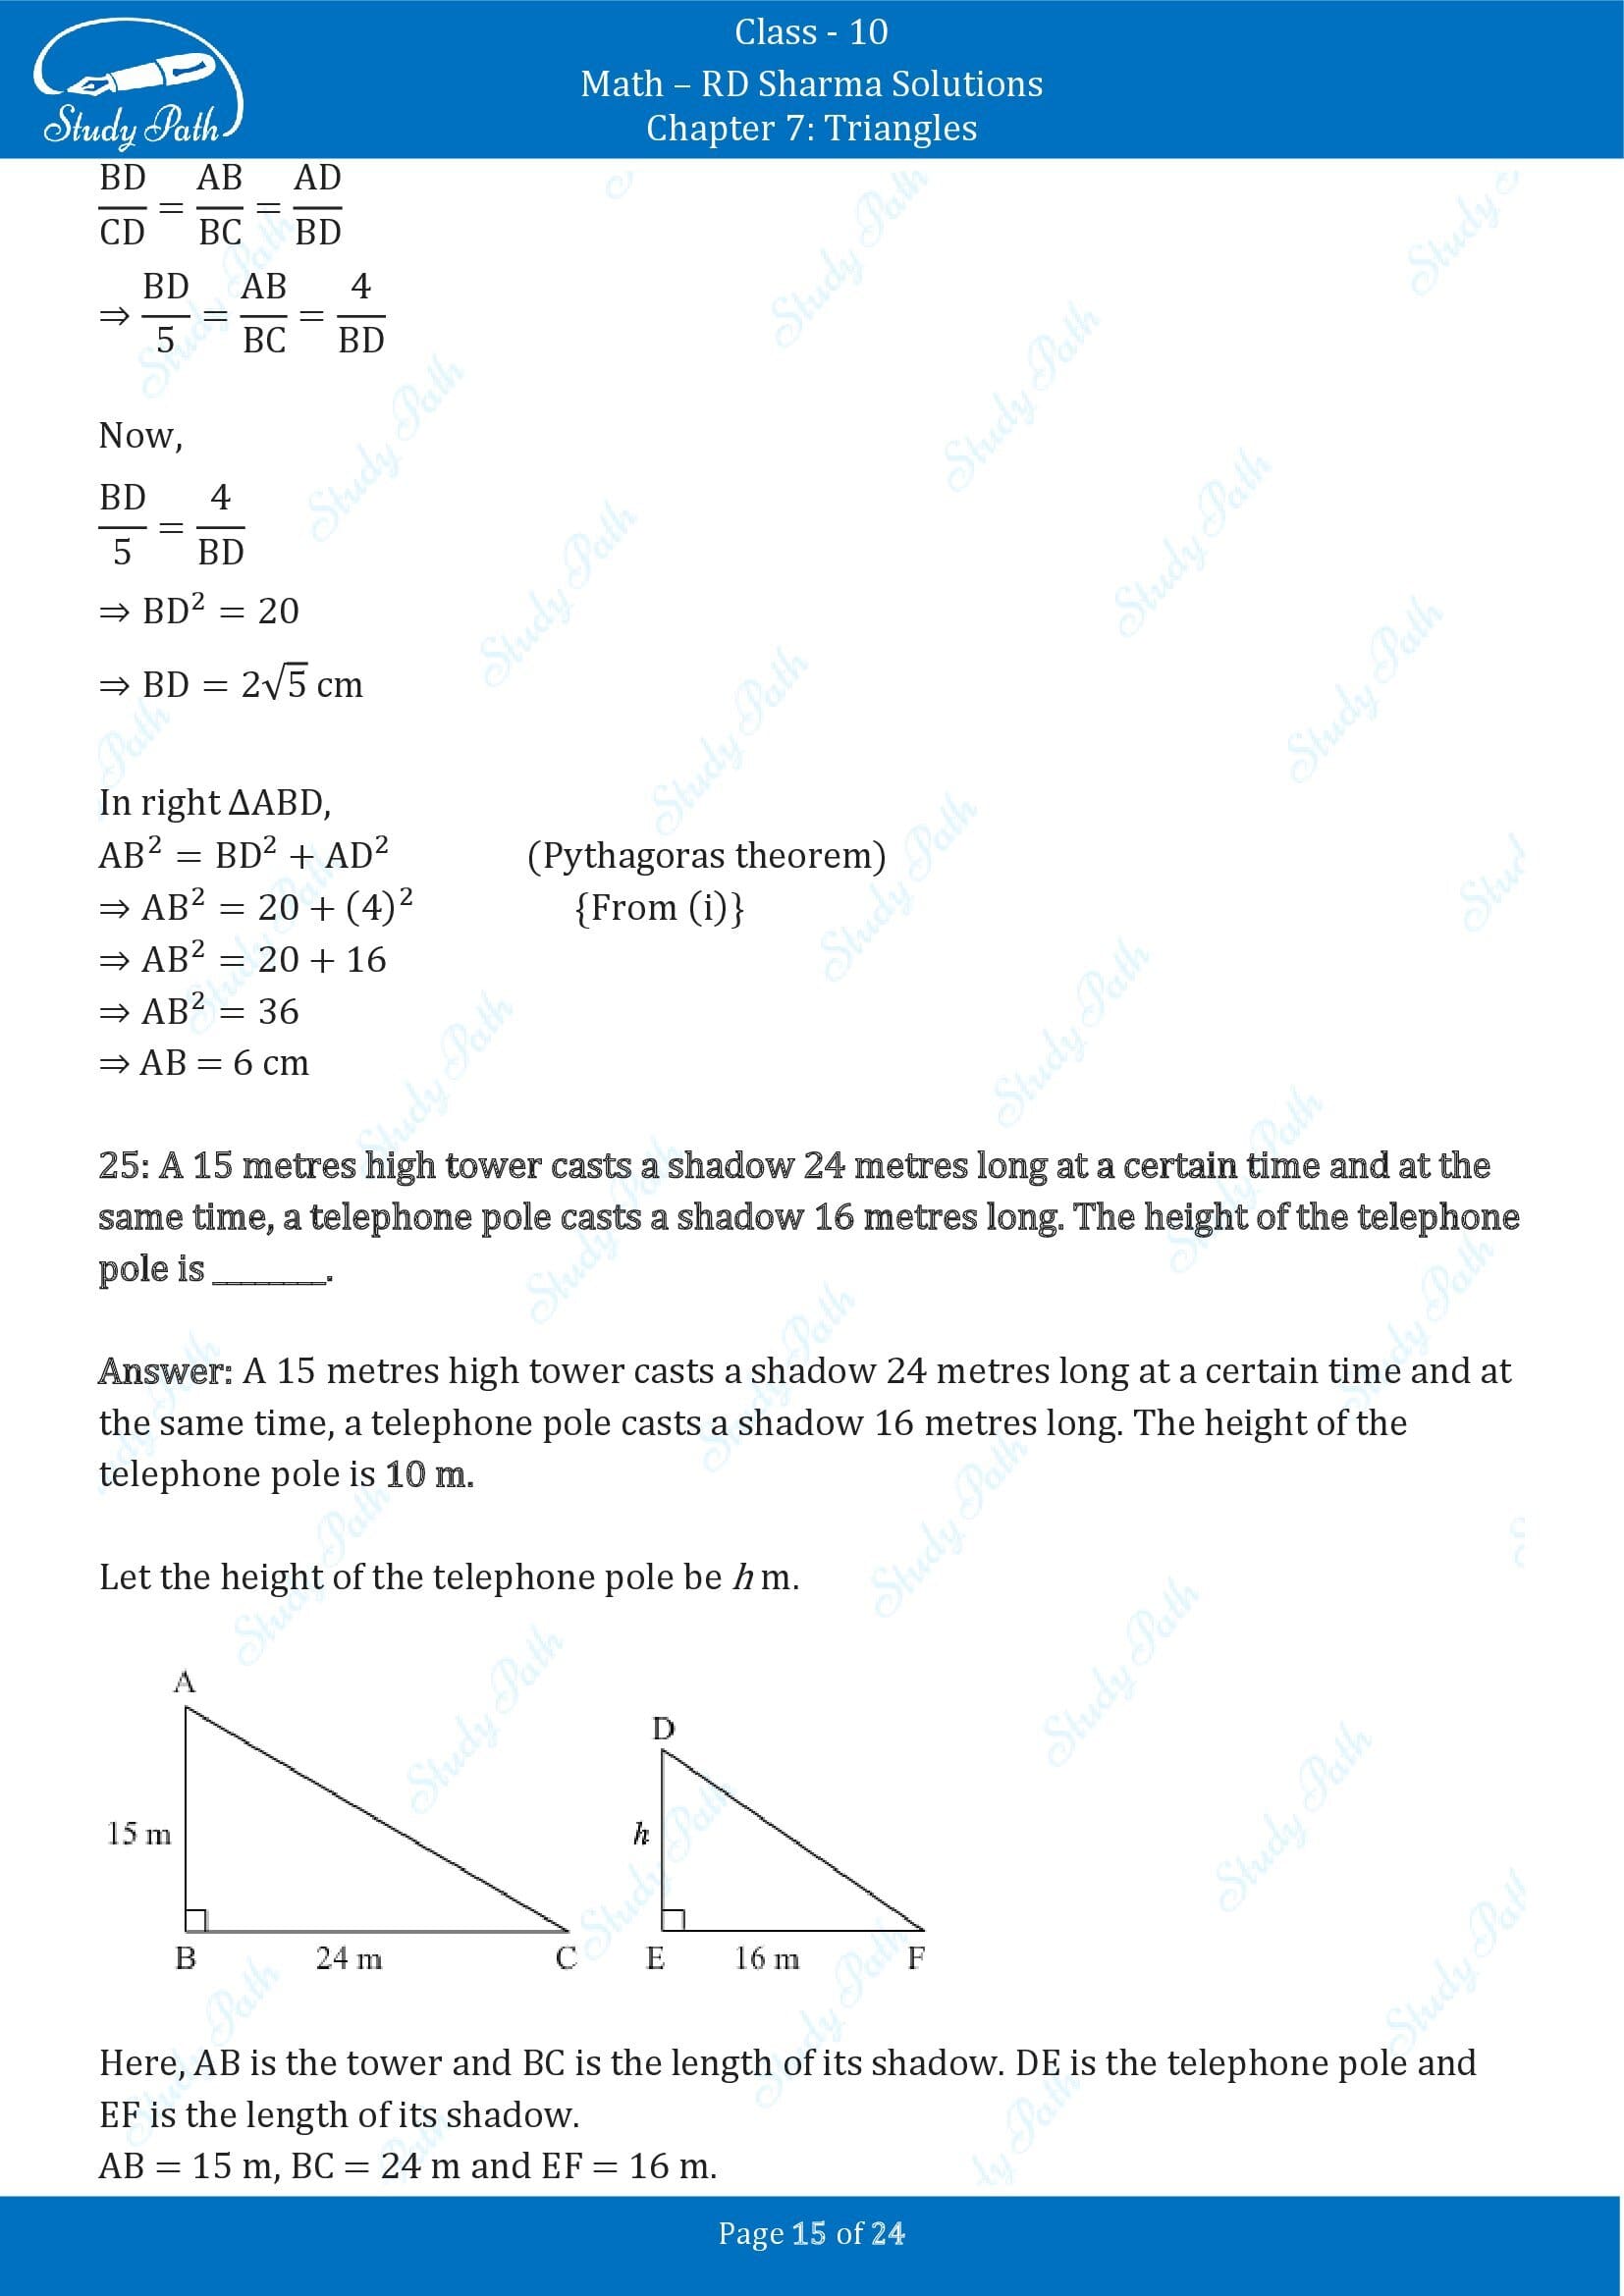 RD Sharma Solutions Class 10 Chapter 7 Triangles Fill in the Blank Type Questions FBQs 00015